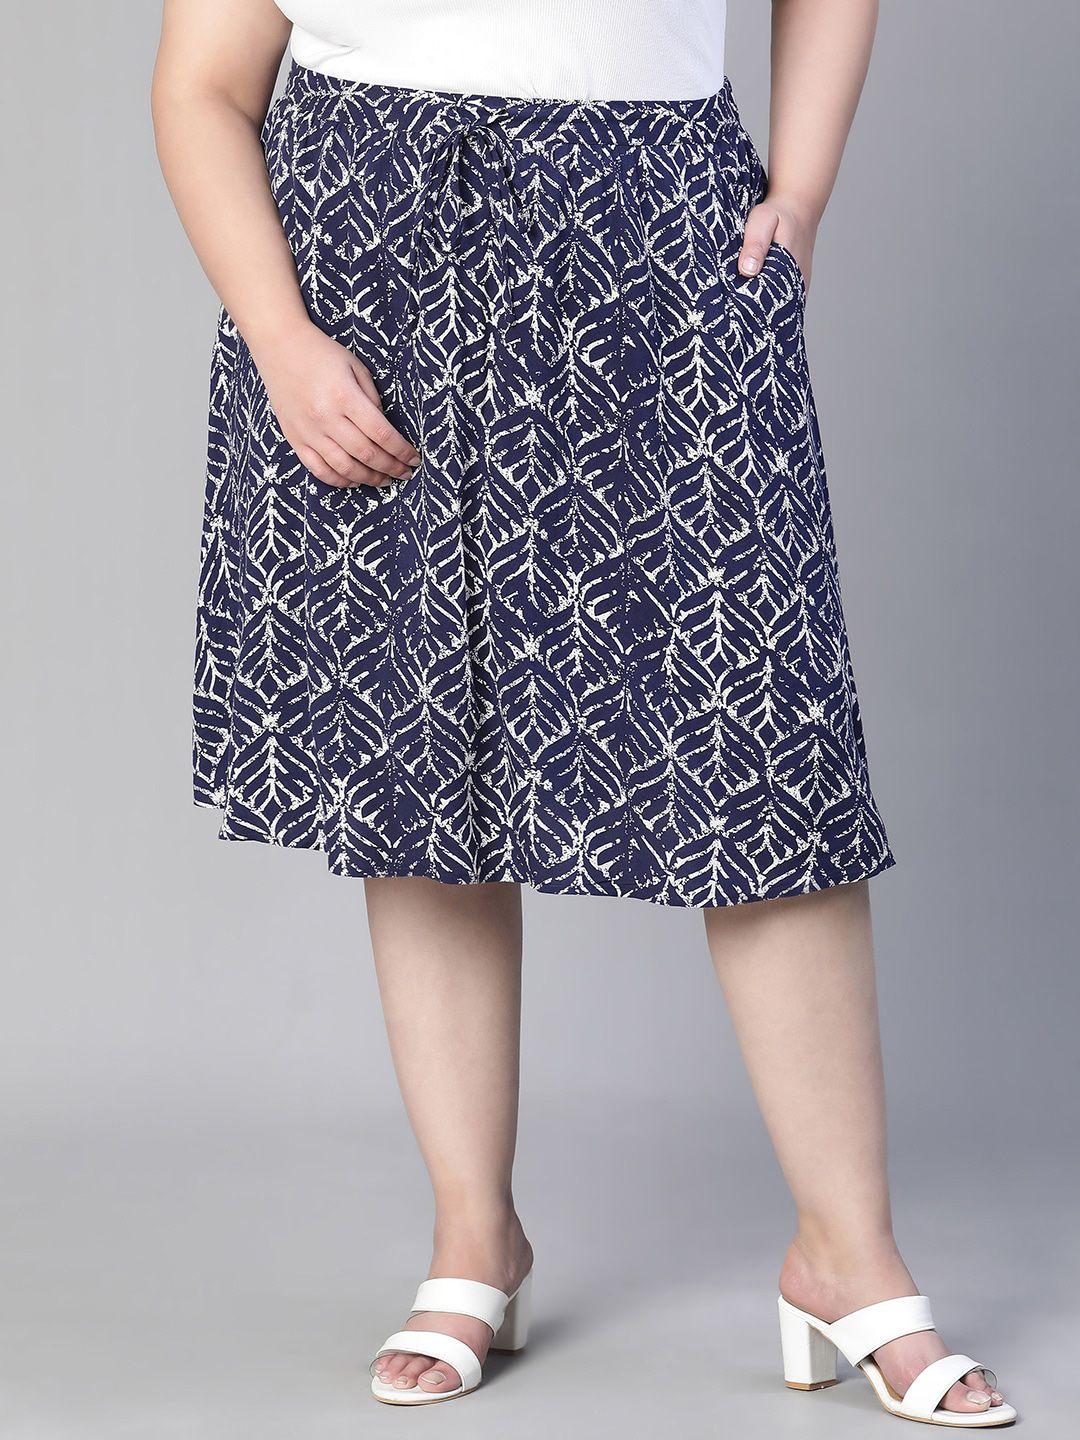 oxolloxo-plus-size-floral-printed-flared-midi-skirt